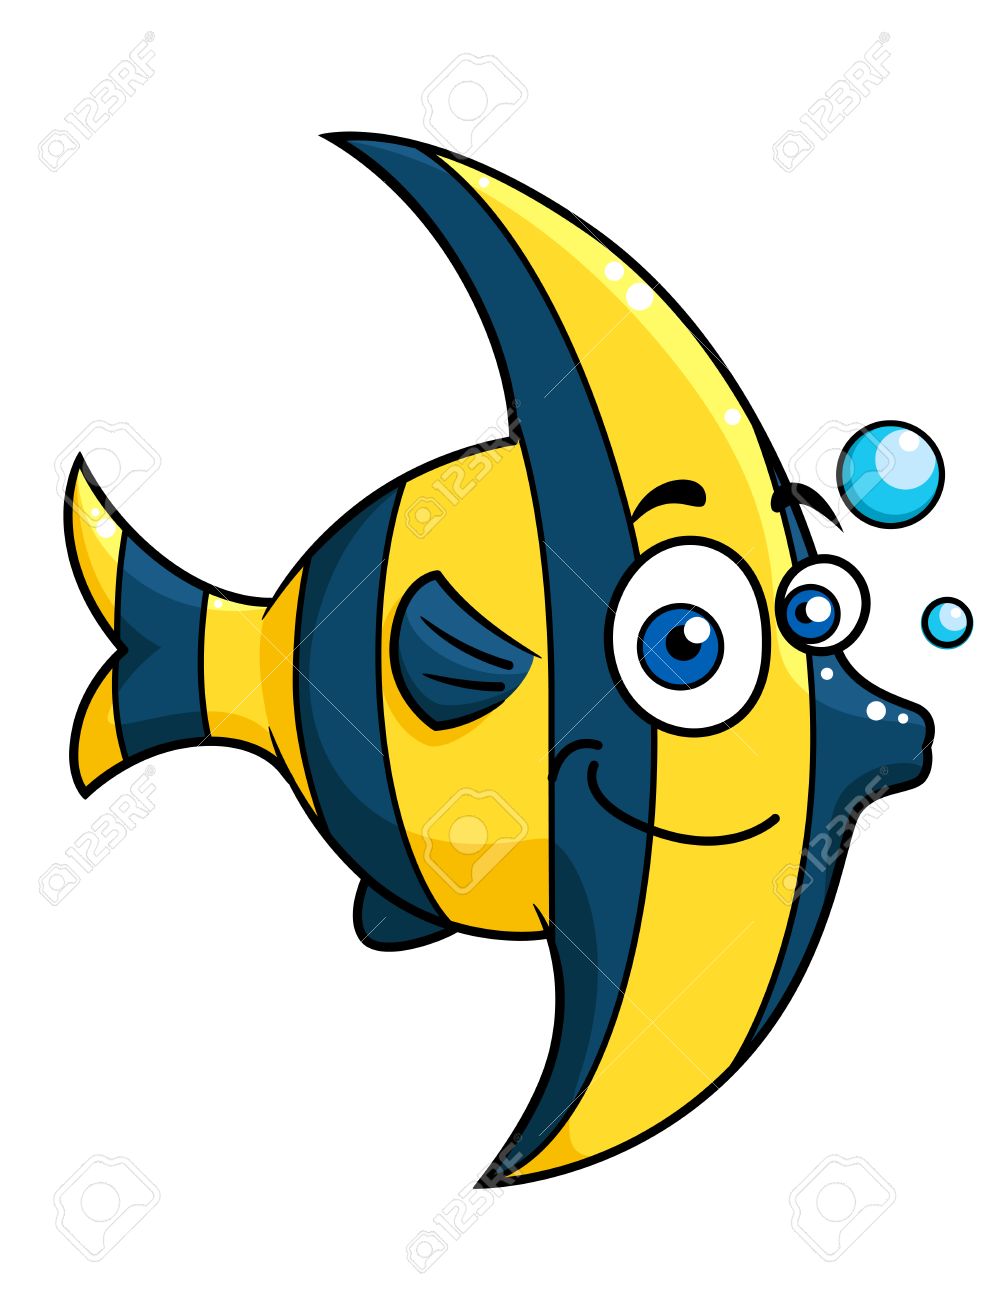 33661461-Smiling-cartoon-striped-tropical-fish-with-blue-and-yellow-stripes-swimming-underwater-with-bubbles--Stock-Vector.jpg